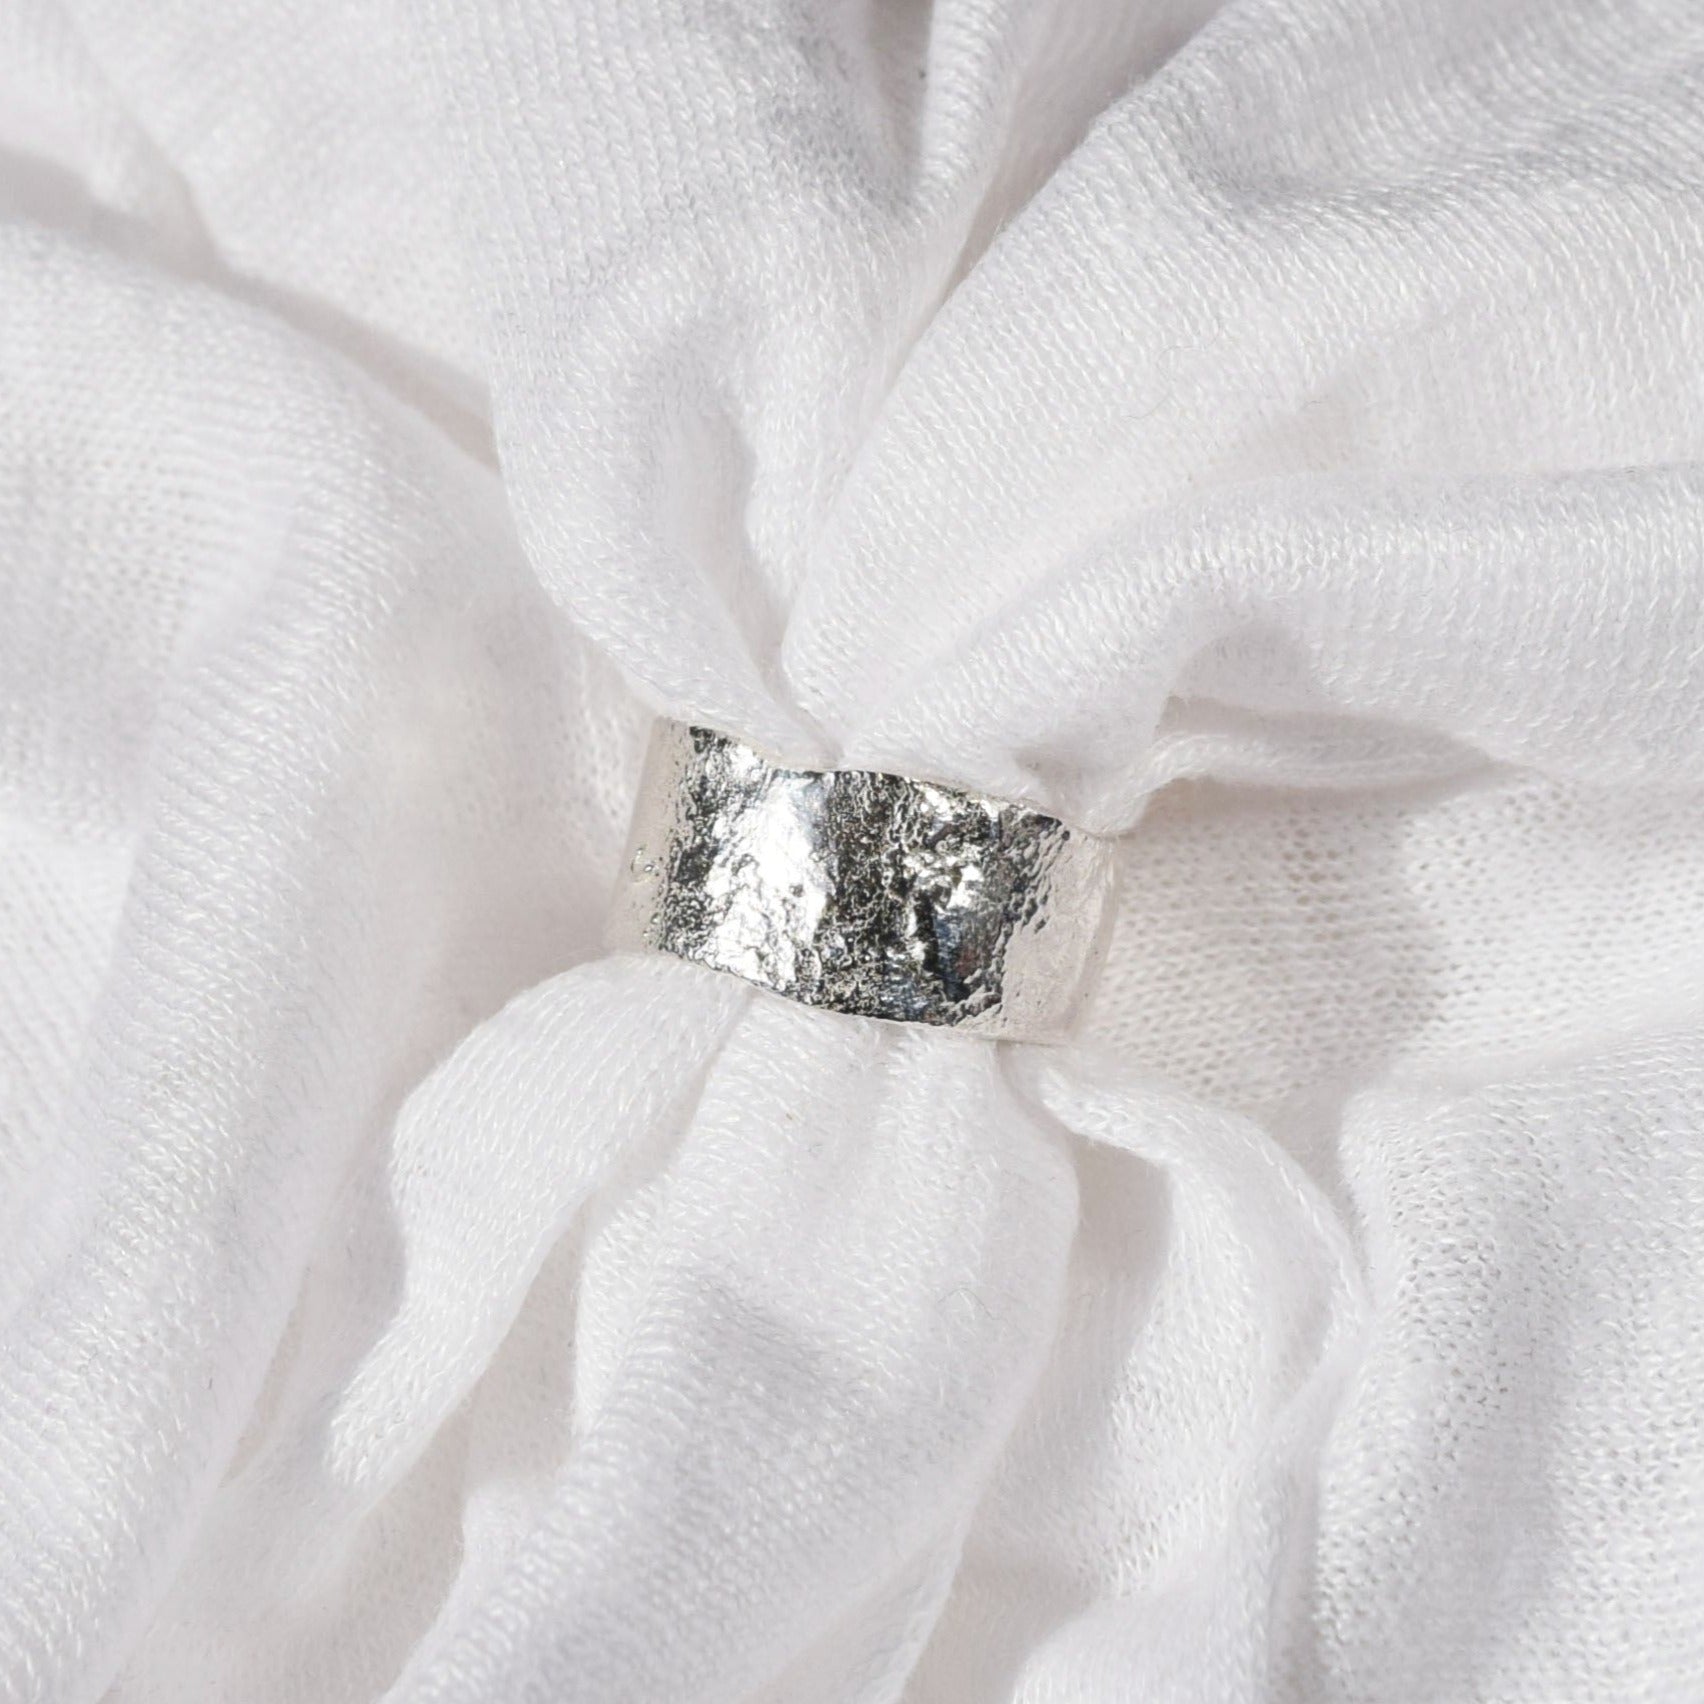 wide molten band ring placed within white fabric